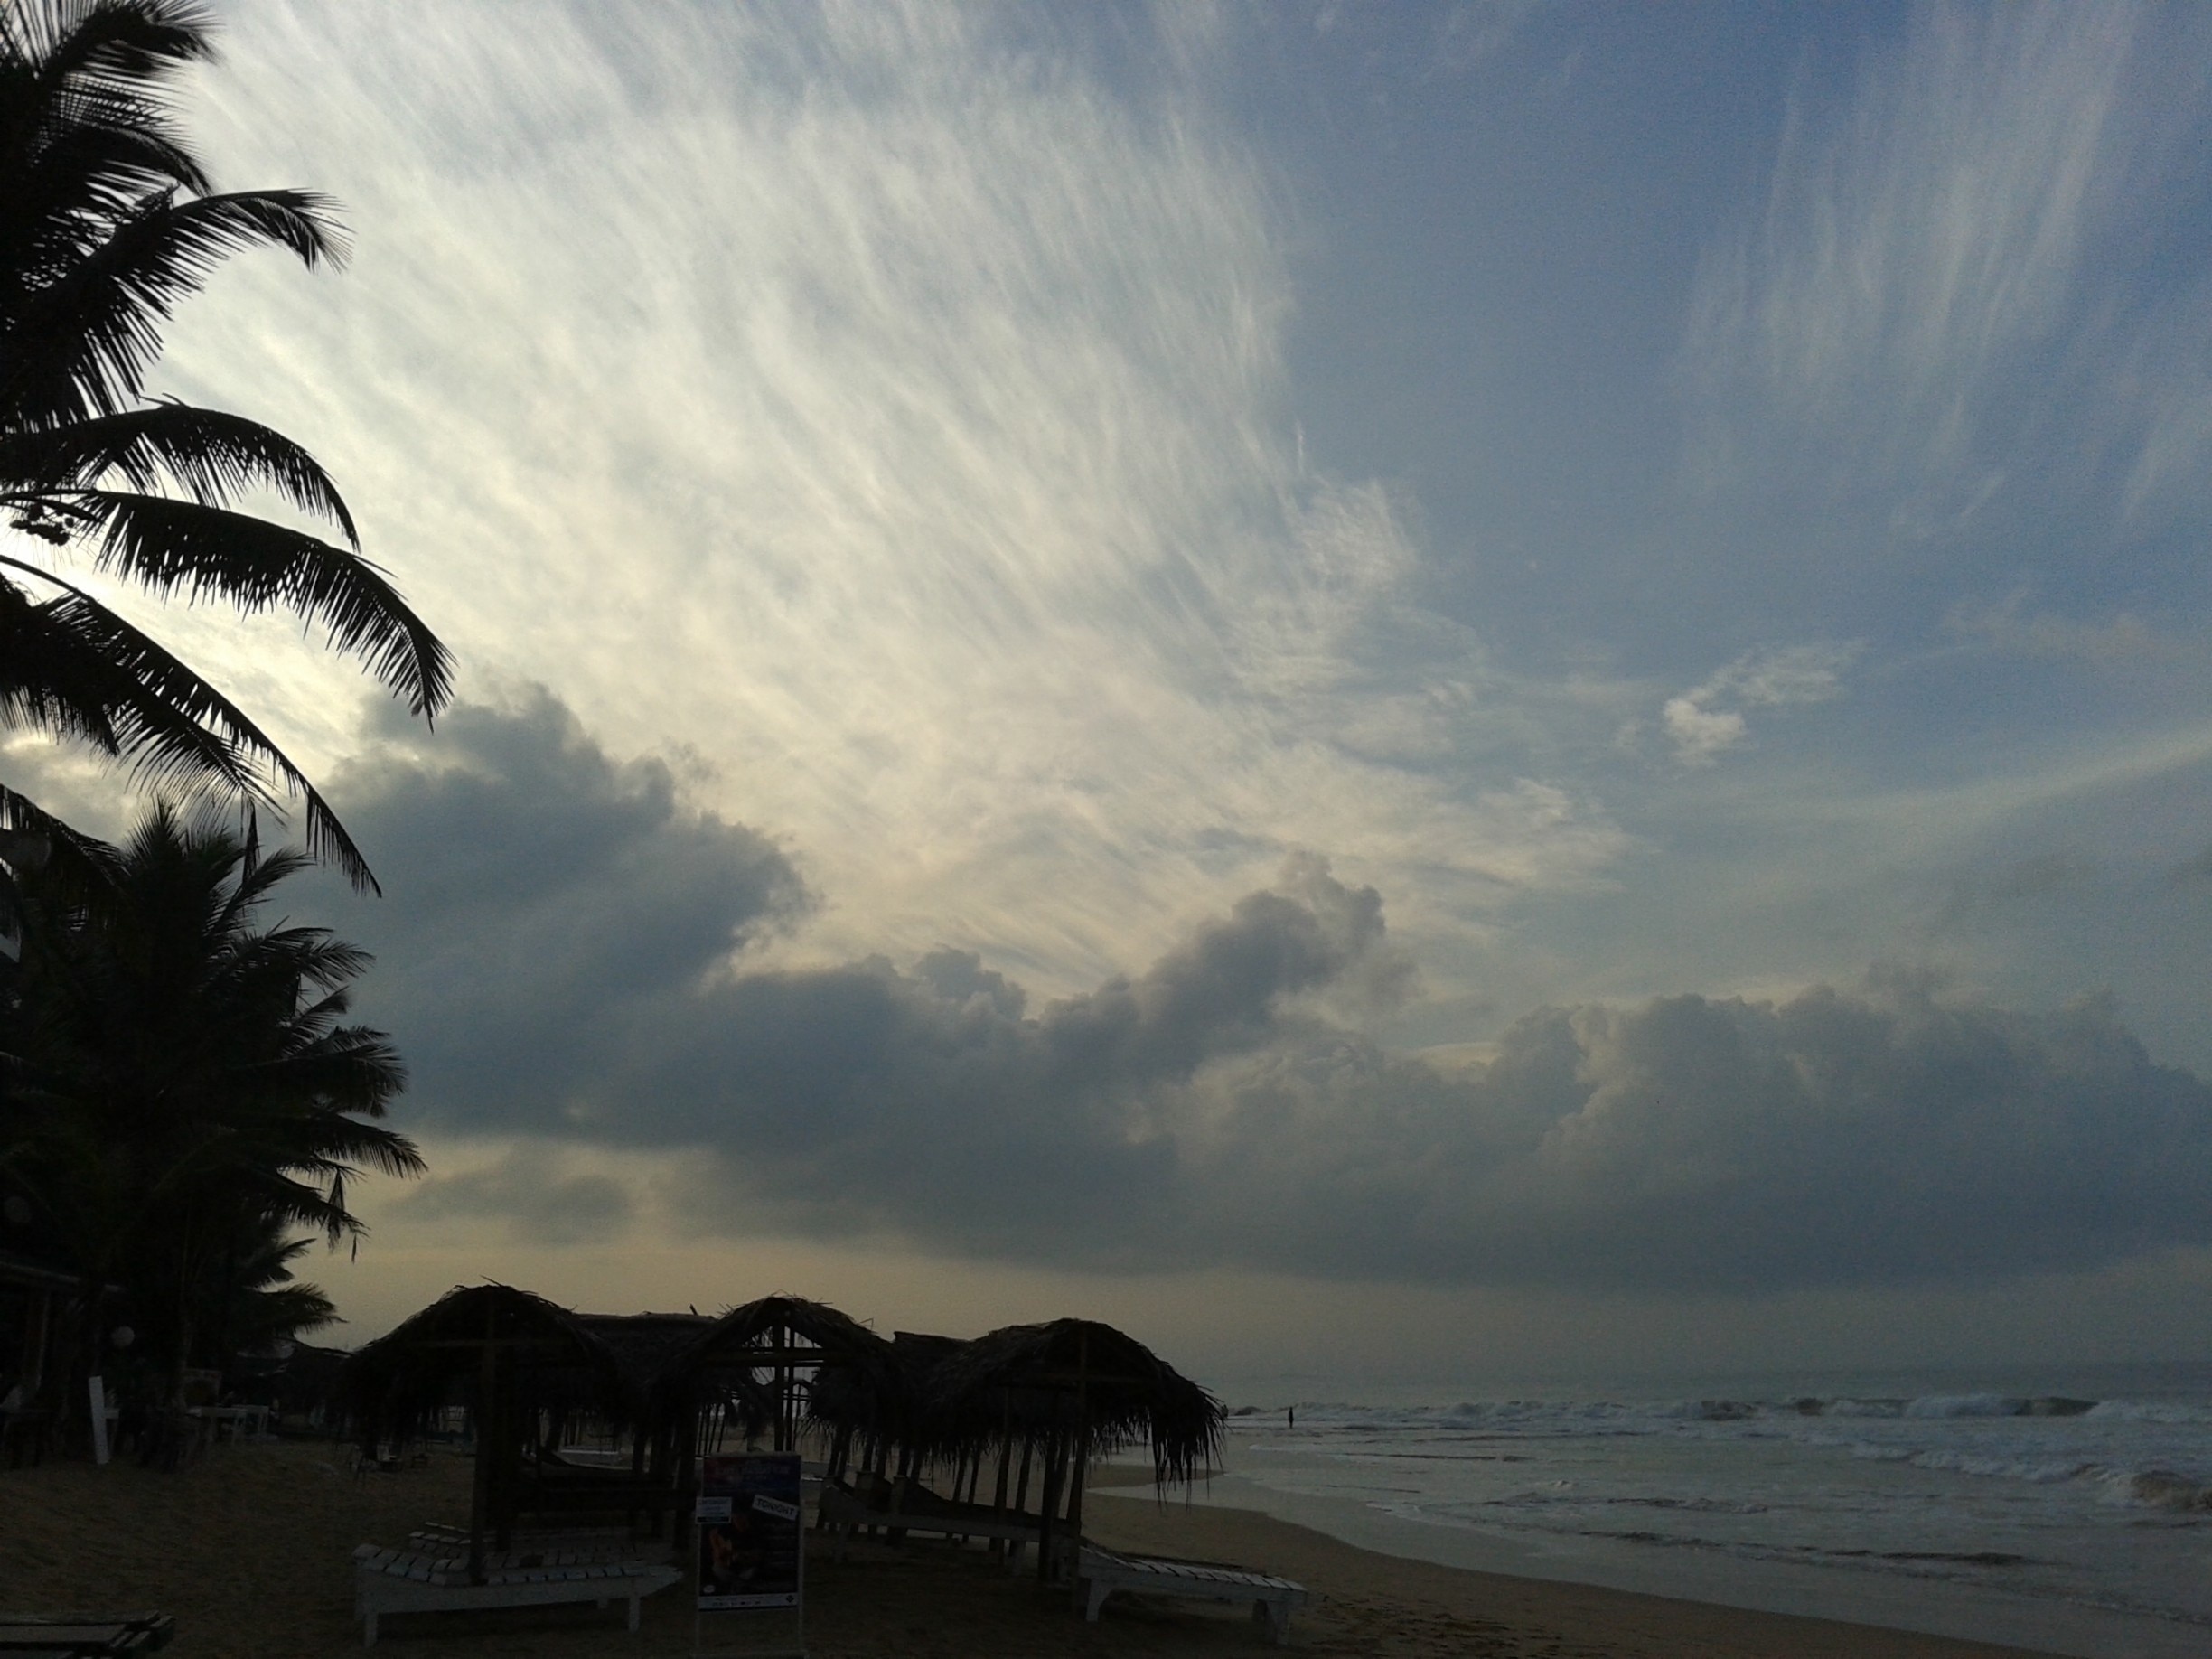 The ever changing cloudscapes of the southwestern sky of Sri Lanka.

Sunrise on this side of the island looks pretty awesome too.

#Hikkaduwa #sky #sunrise #cloudscapes #WorkingHoliday #MovingOutSL #lka #BeachLife